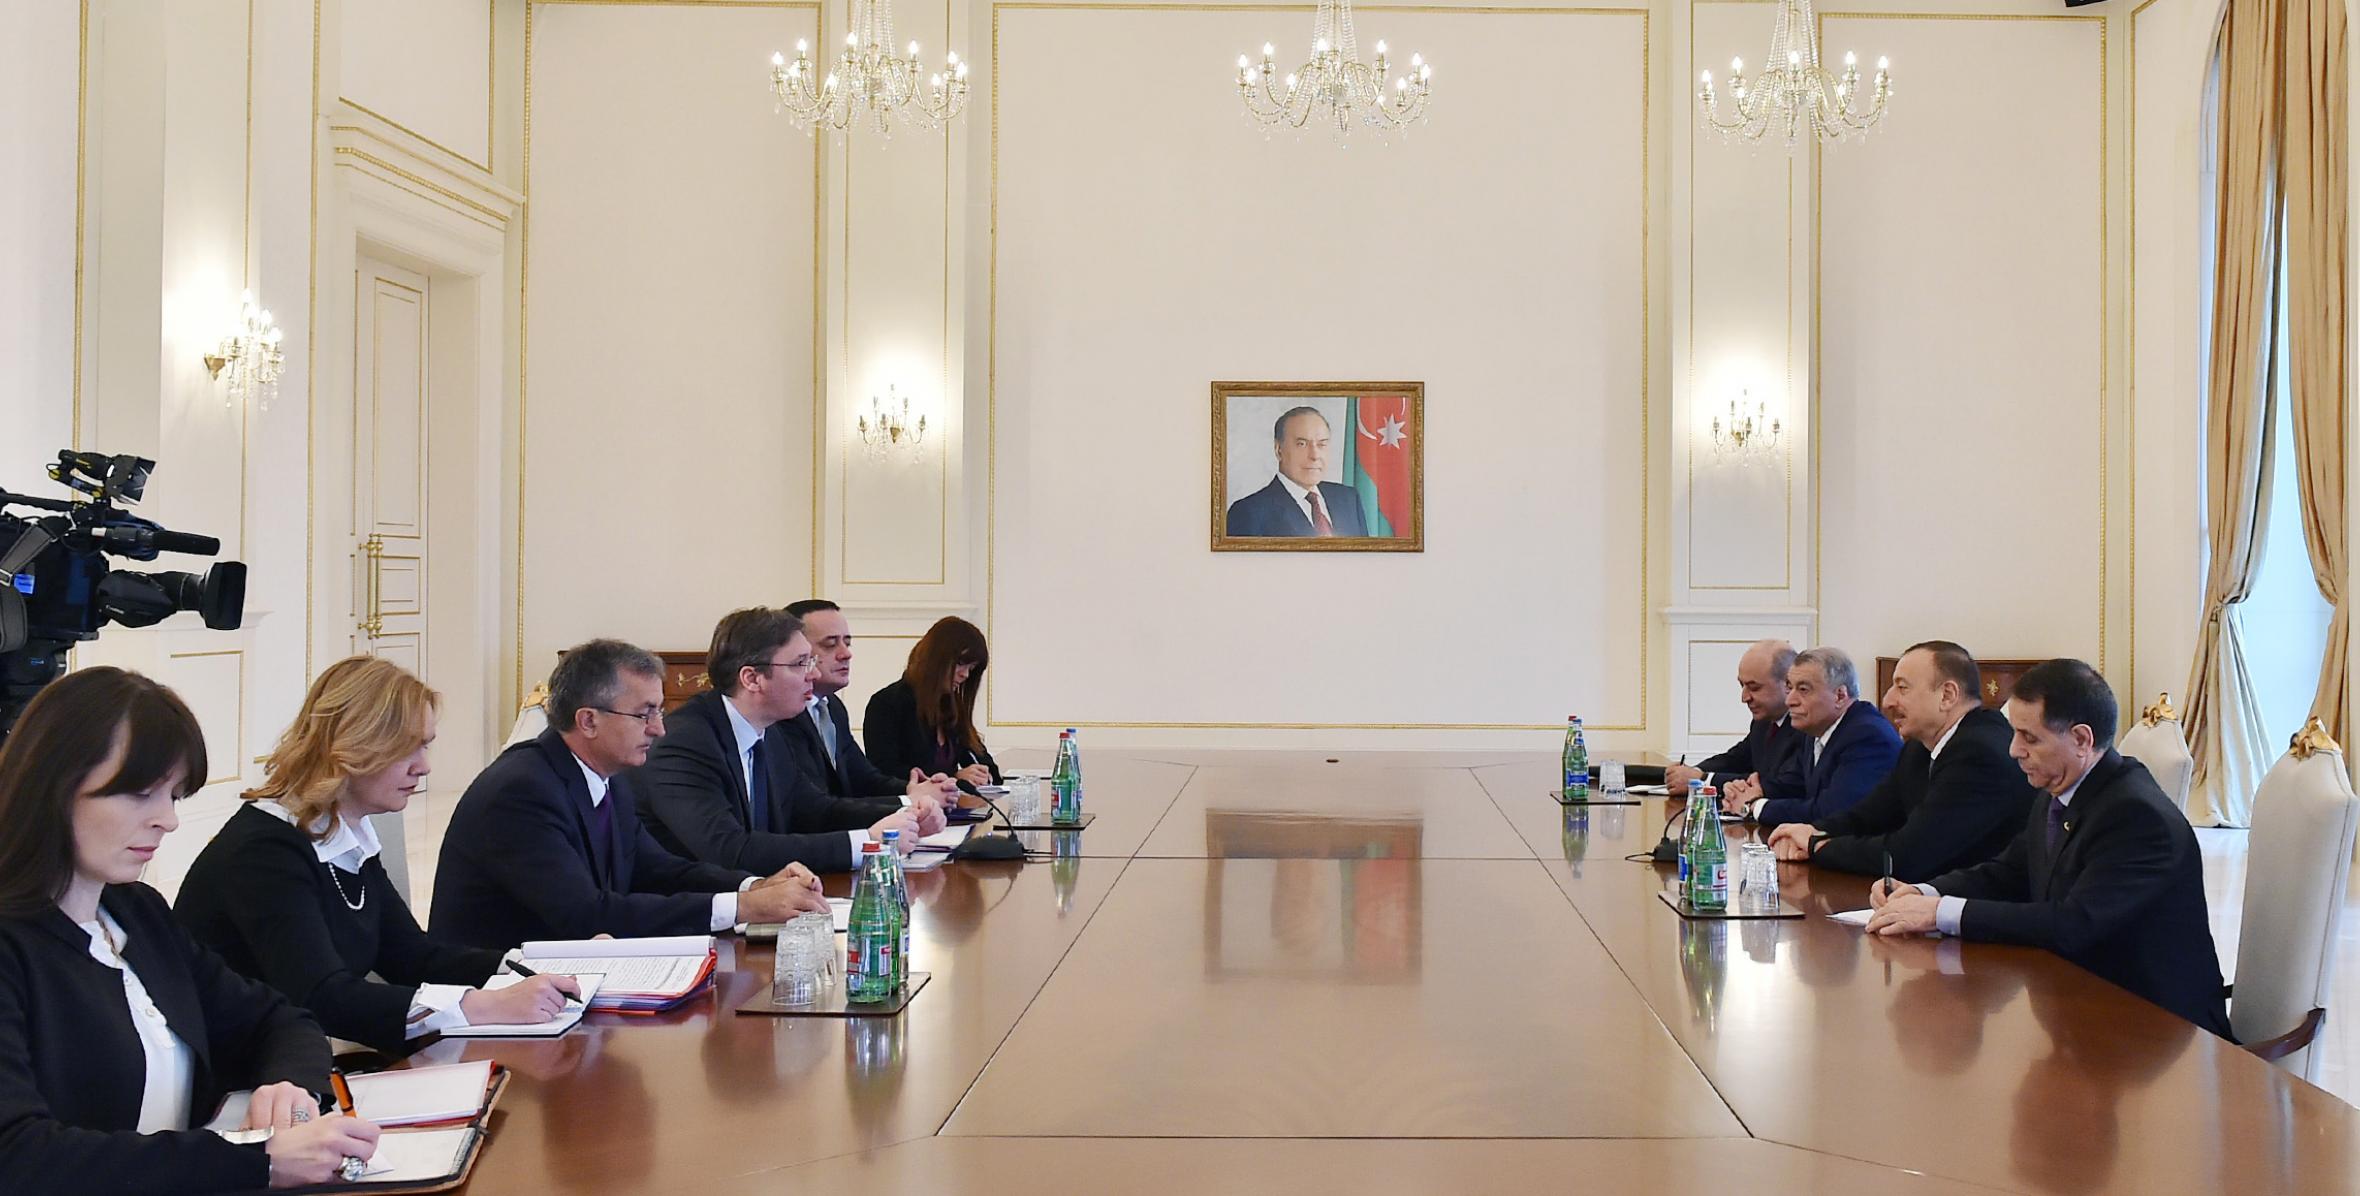 Ilham Aliyev received a delegation led by the Prime Minister of Serbia